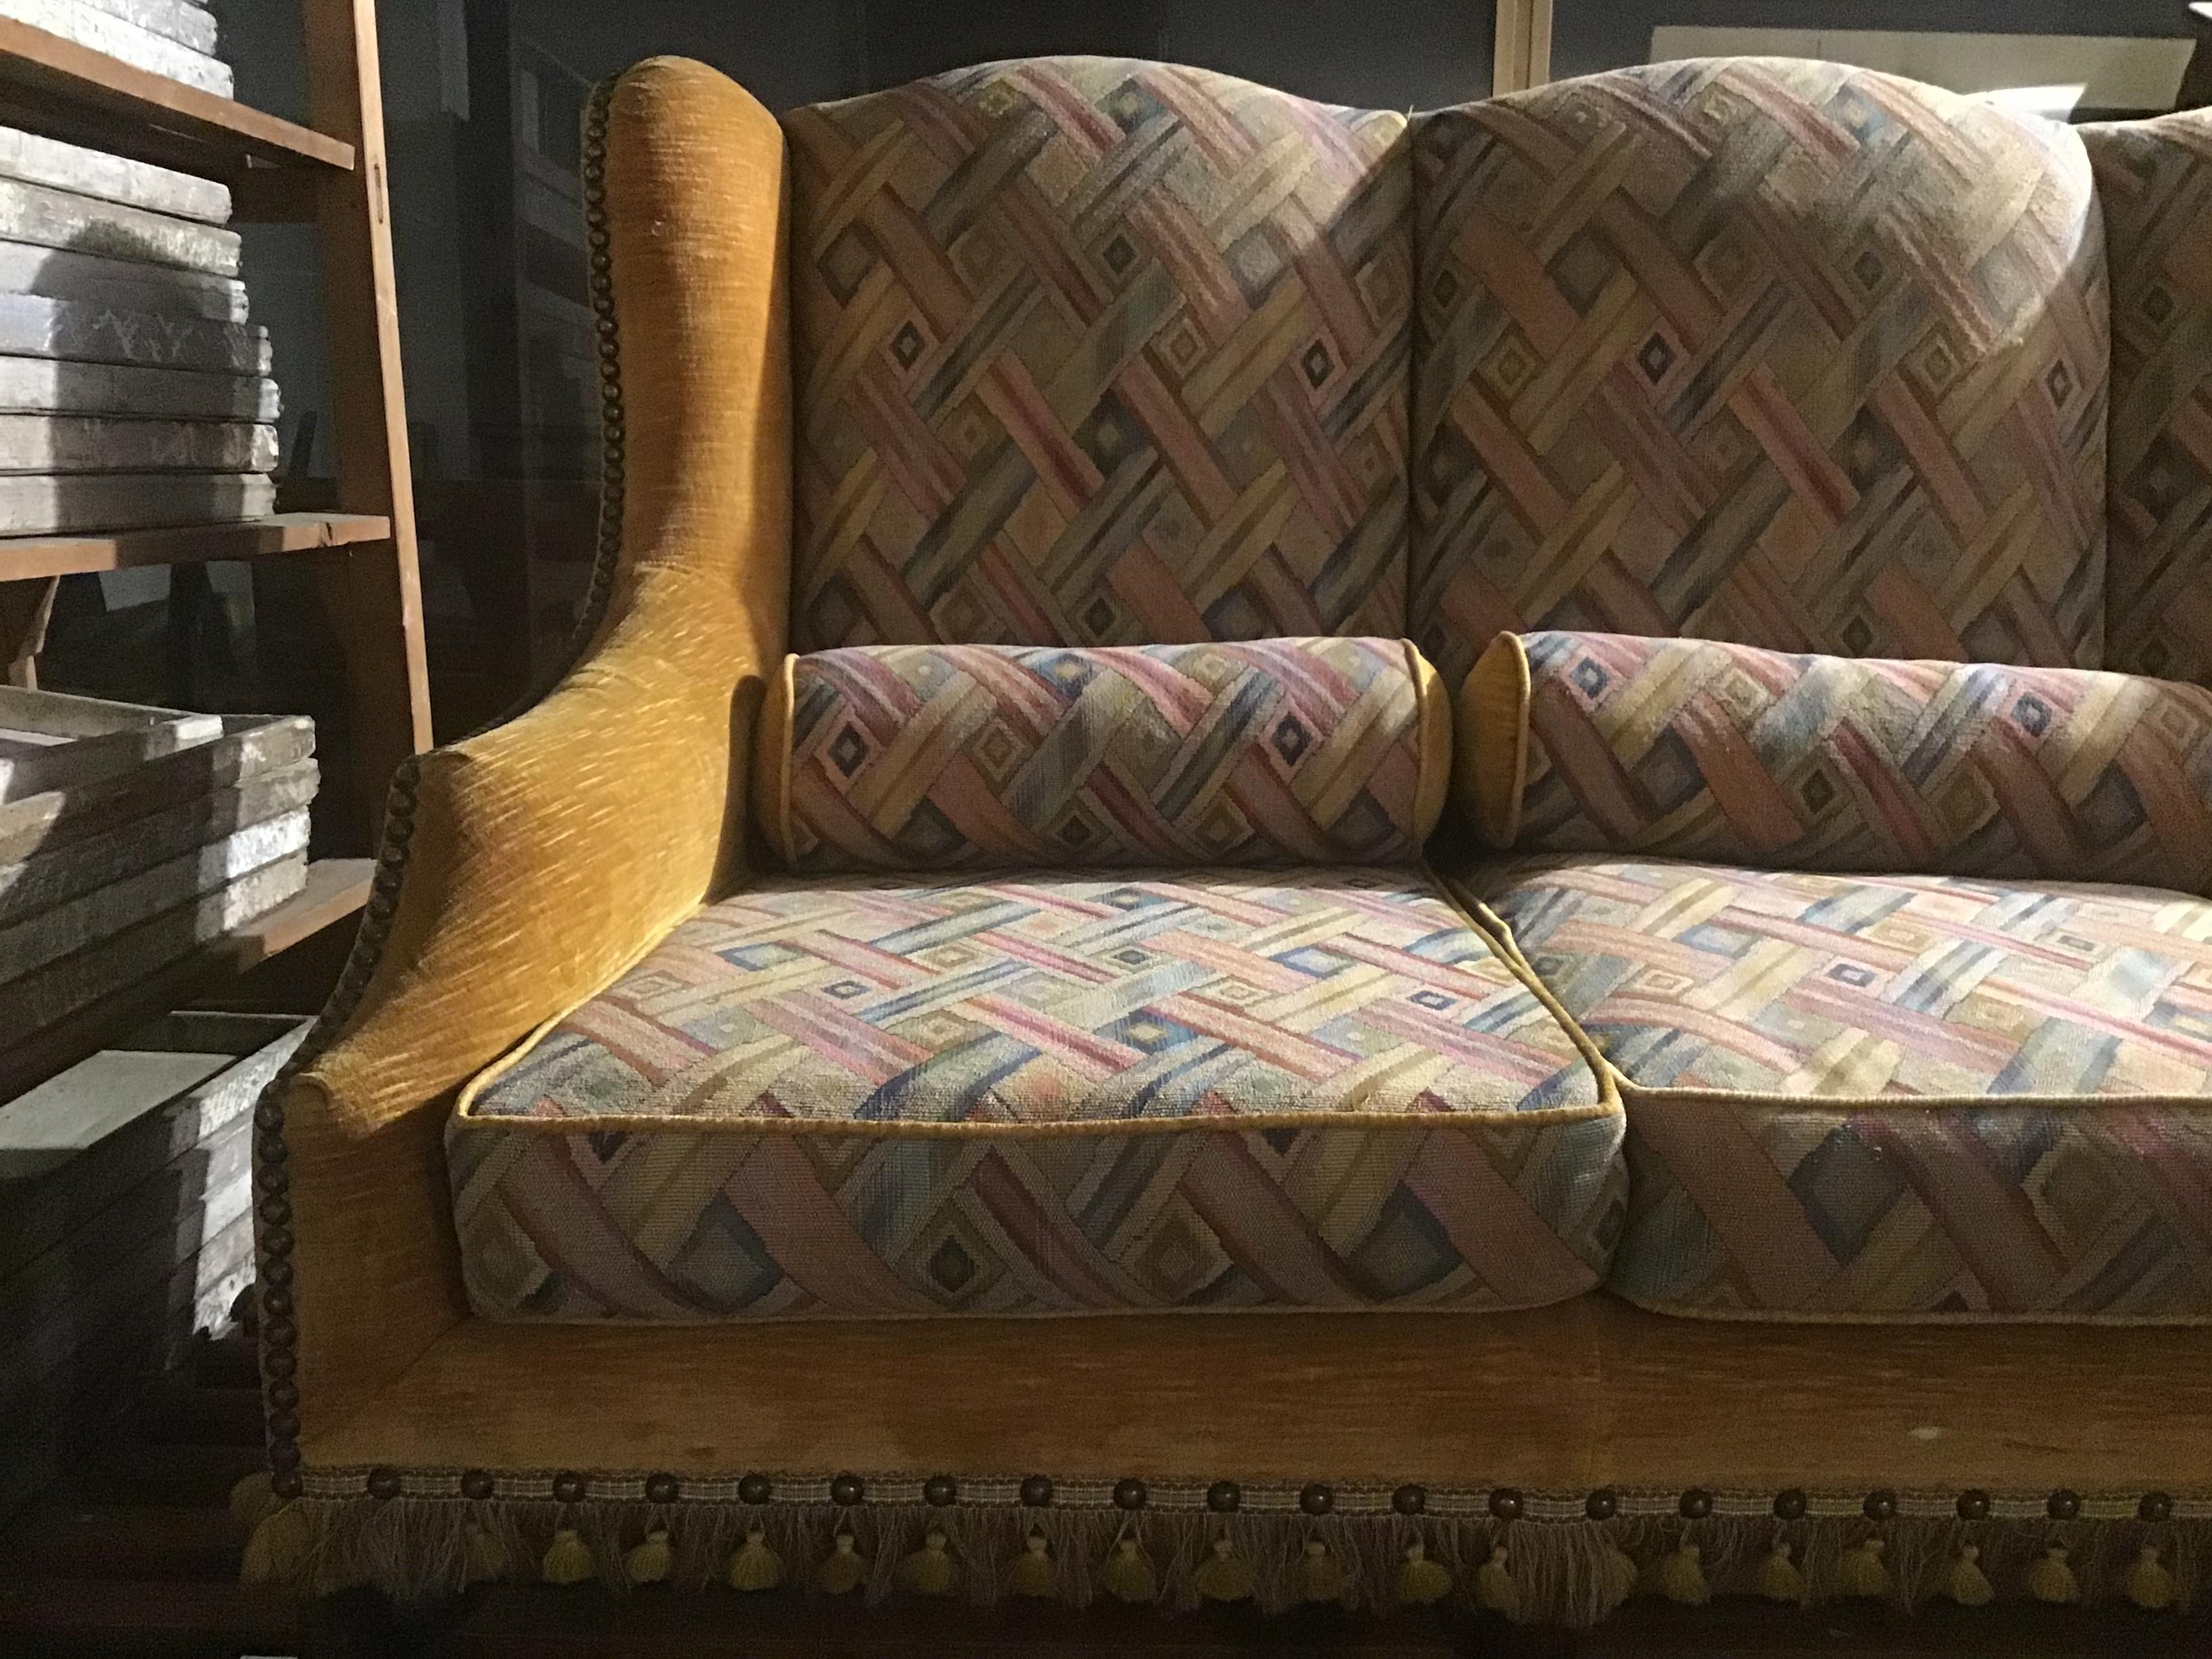 Late 19th Century 19th Century French Three-Seat Sofa with Wooden Structure and Original Fabric